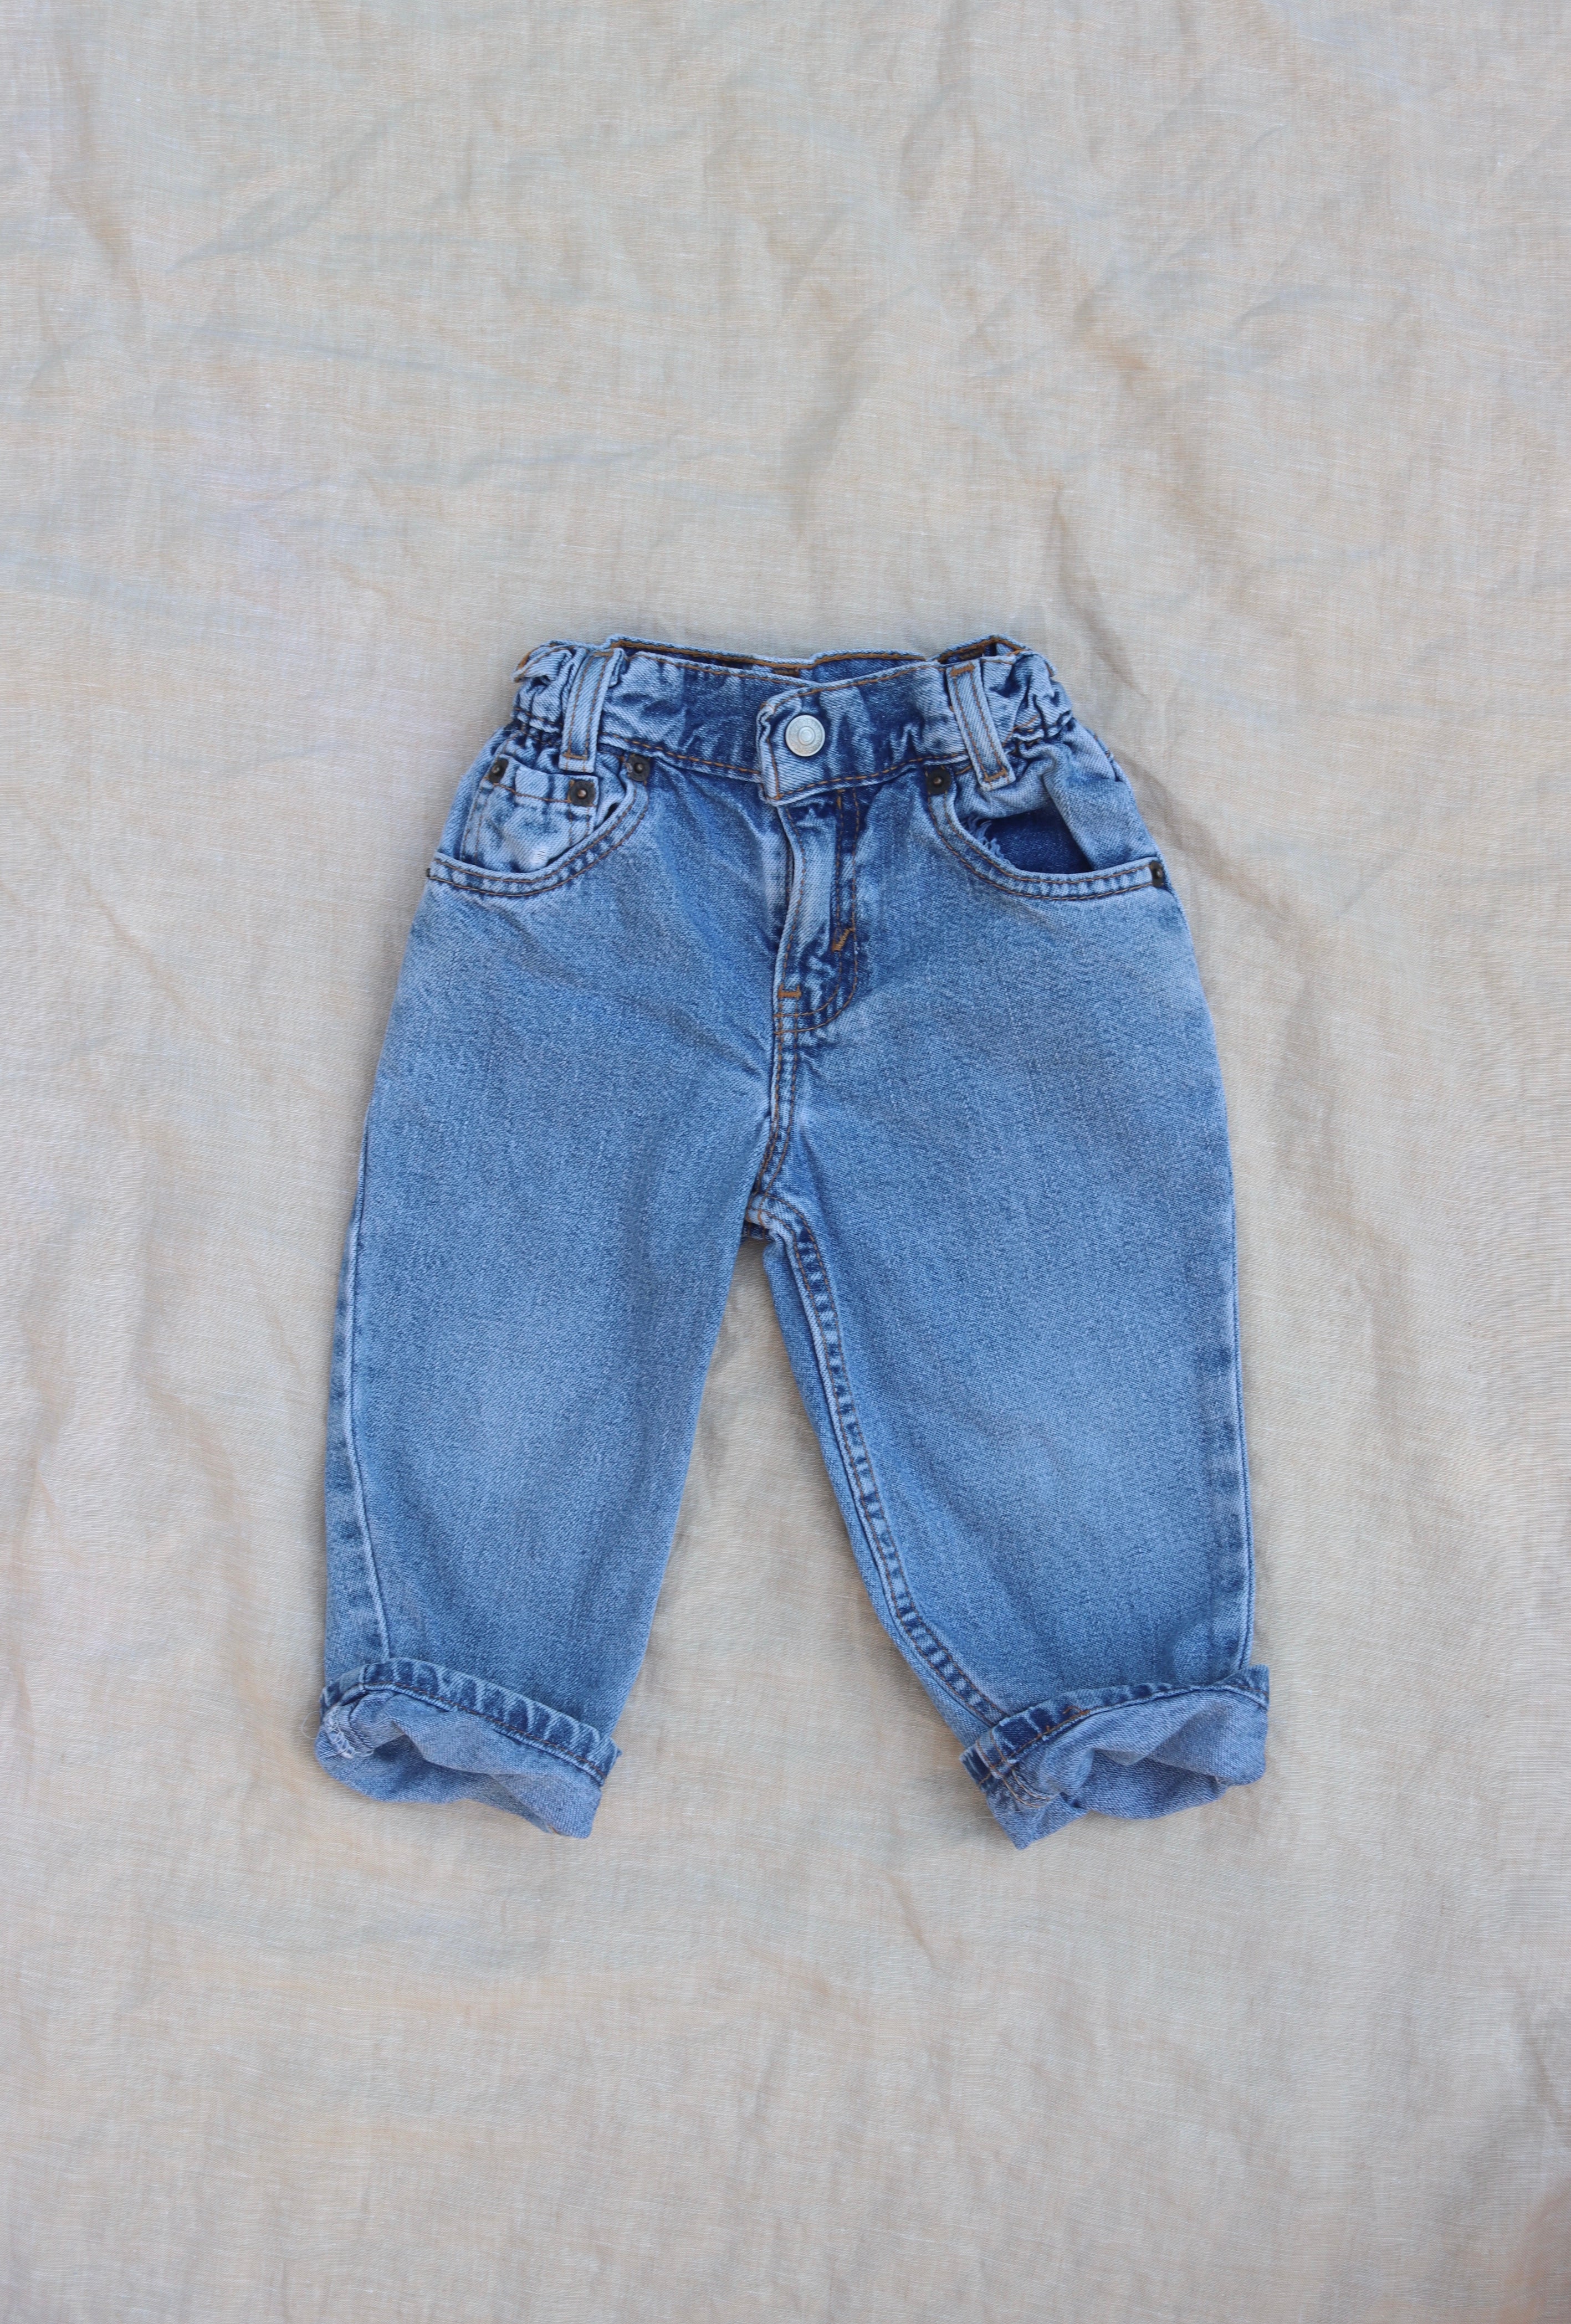 Vintage Levi's Orange Tab Jeans - size 12-24 months - Made in Mexico